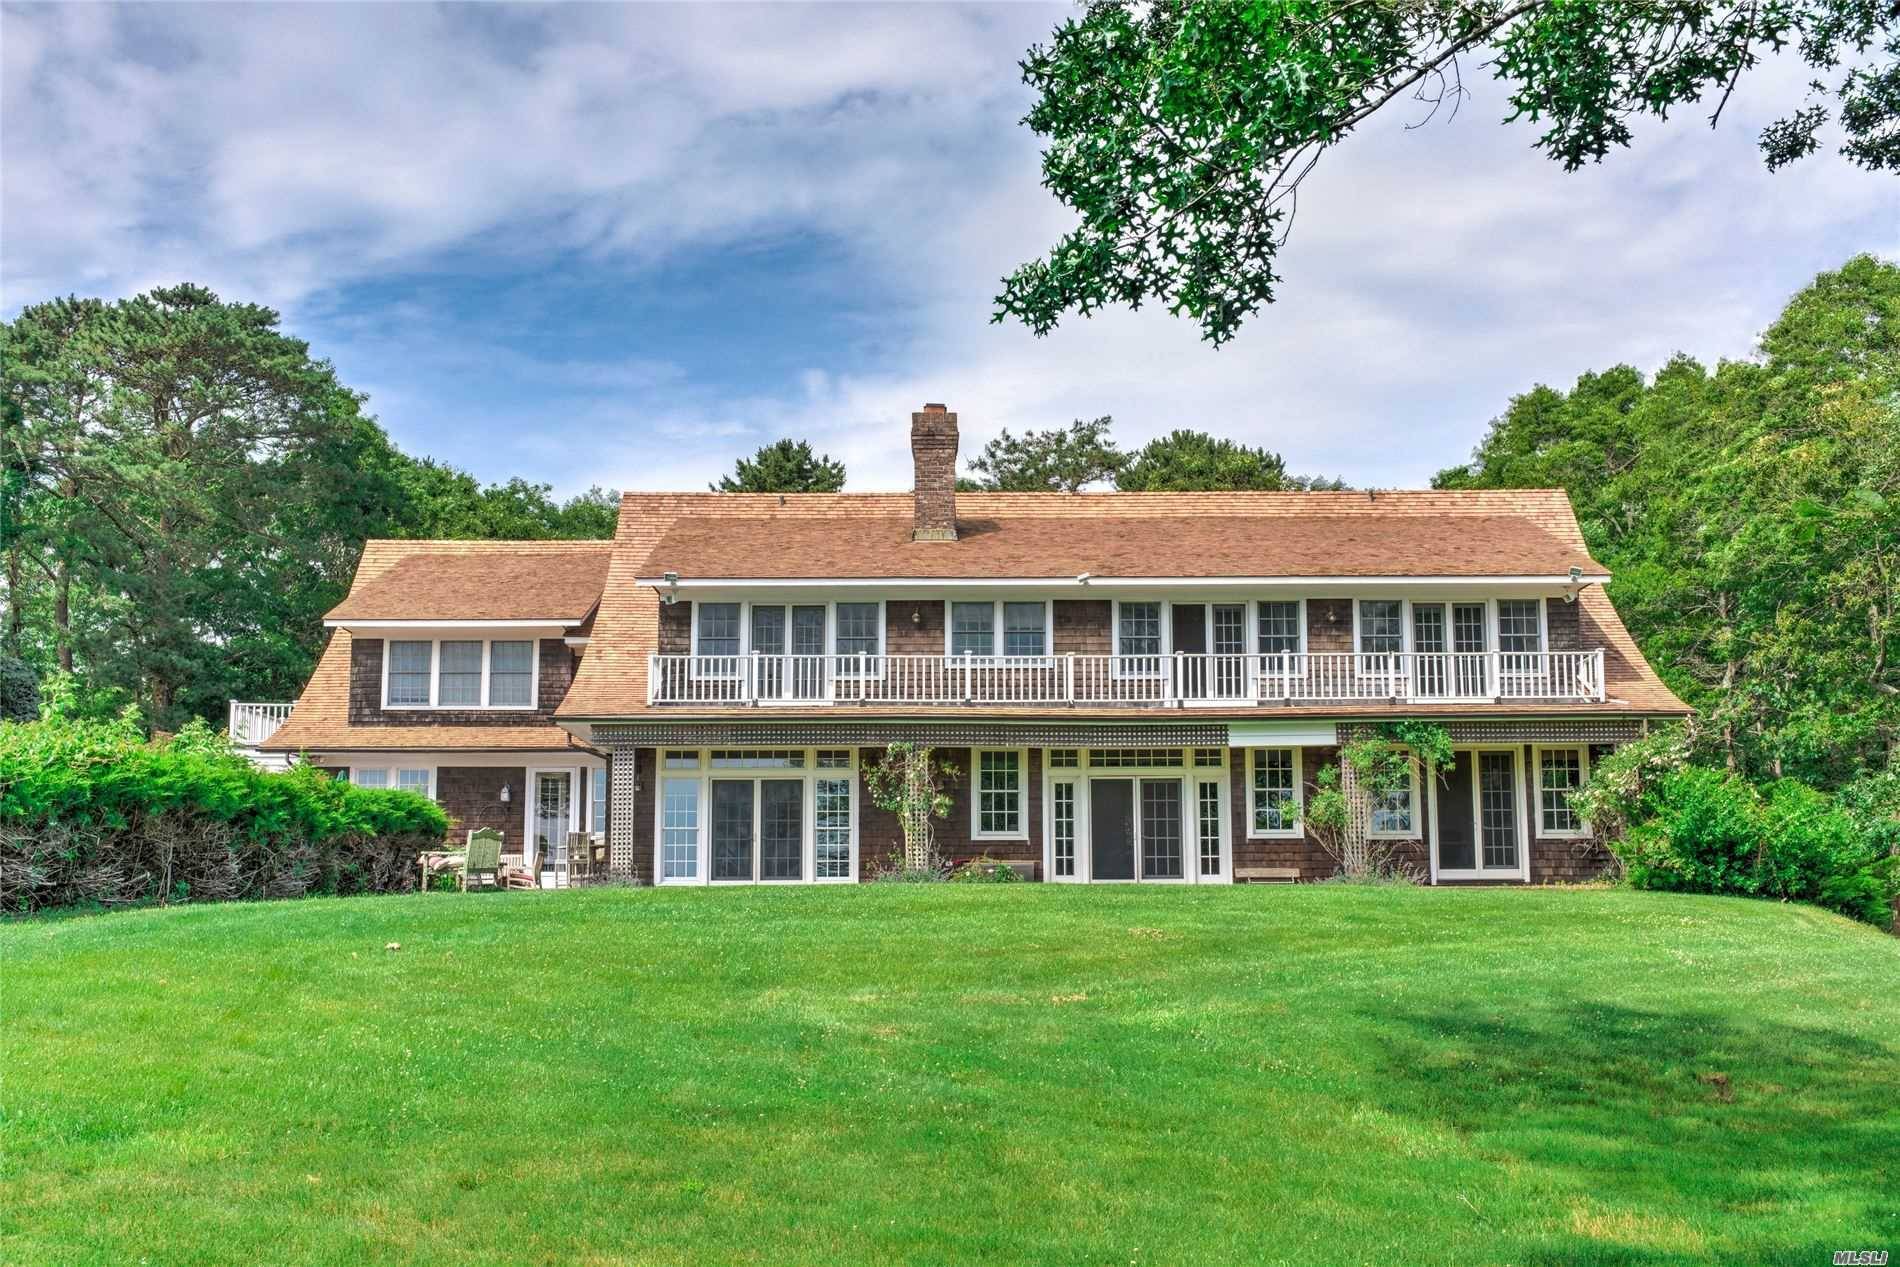 Indulge in Hamptons luxury living and ultimate privacy in East Quogue at this 2.